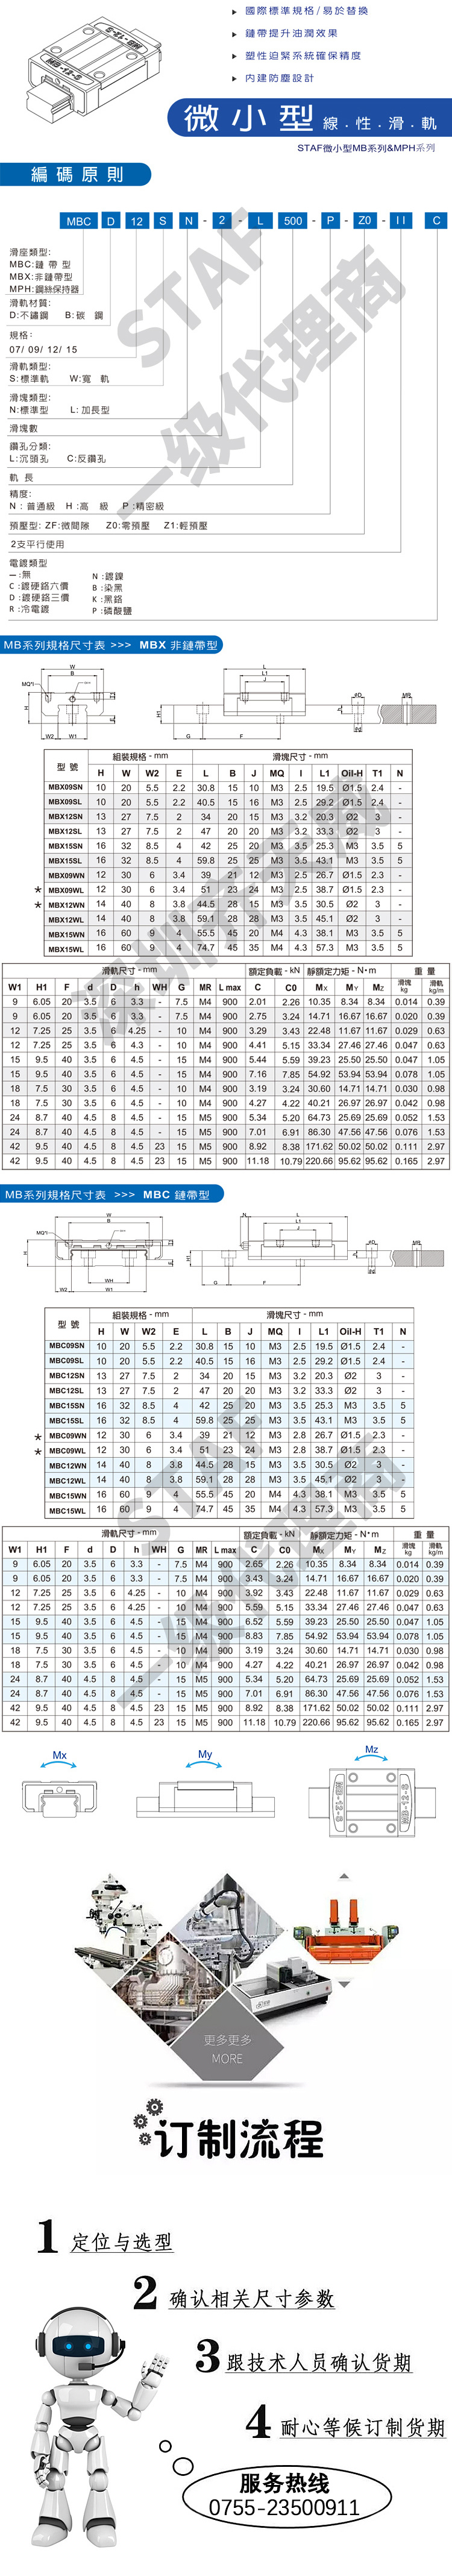 Cross Guide and Linear Guide, Shangyin Linear Guide Supplier